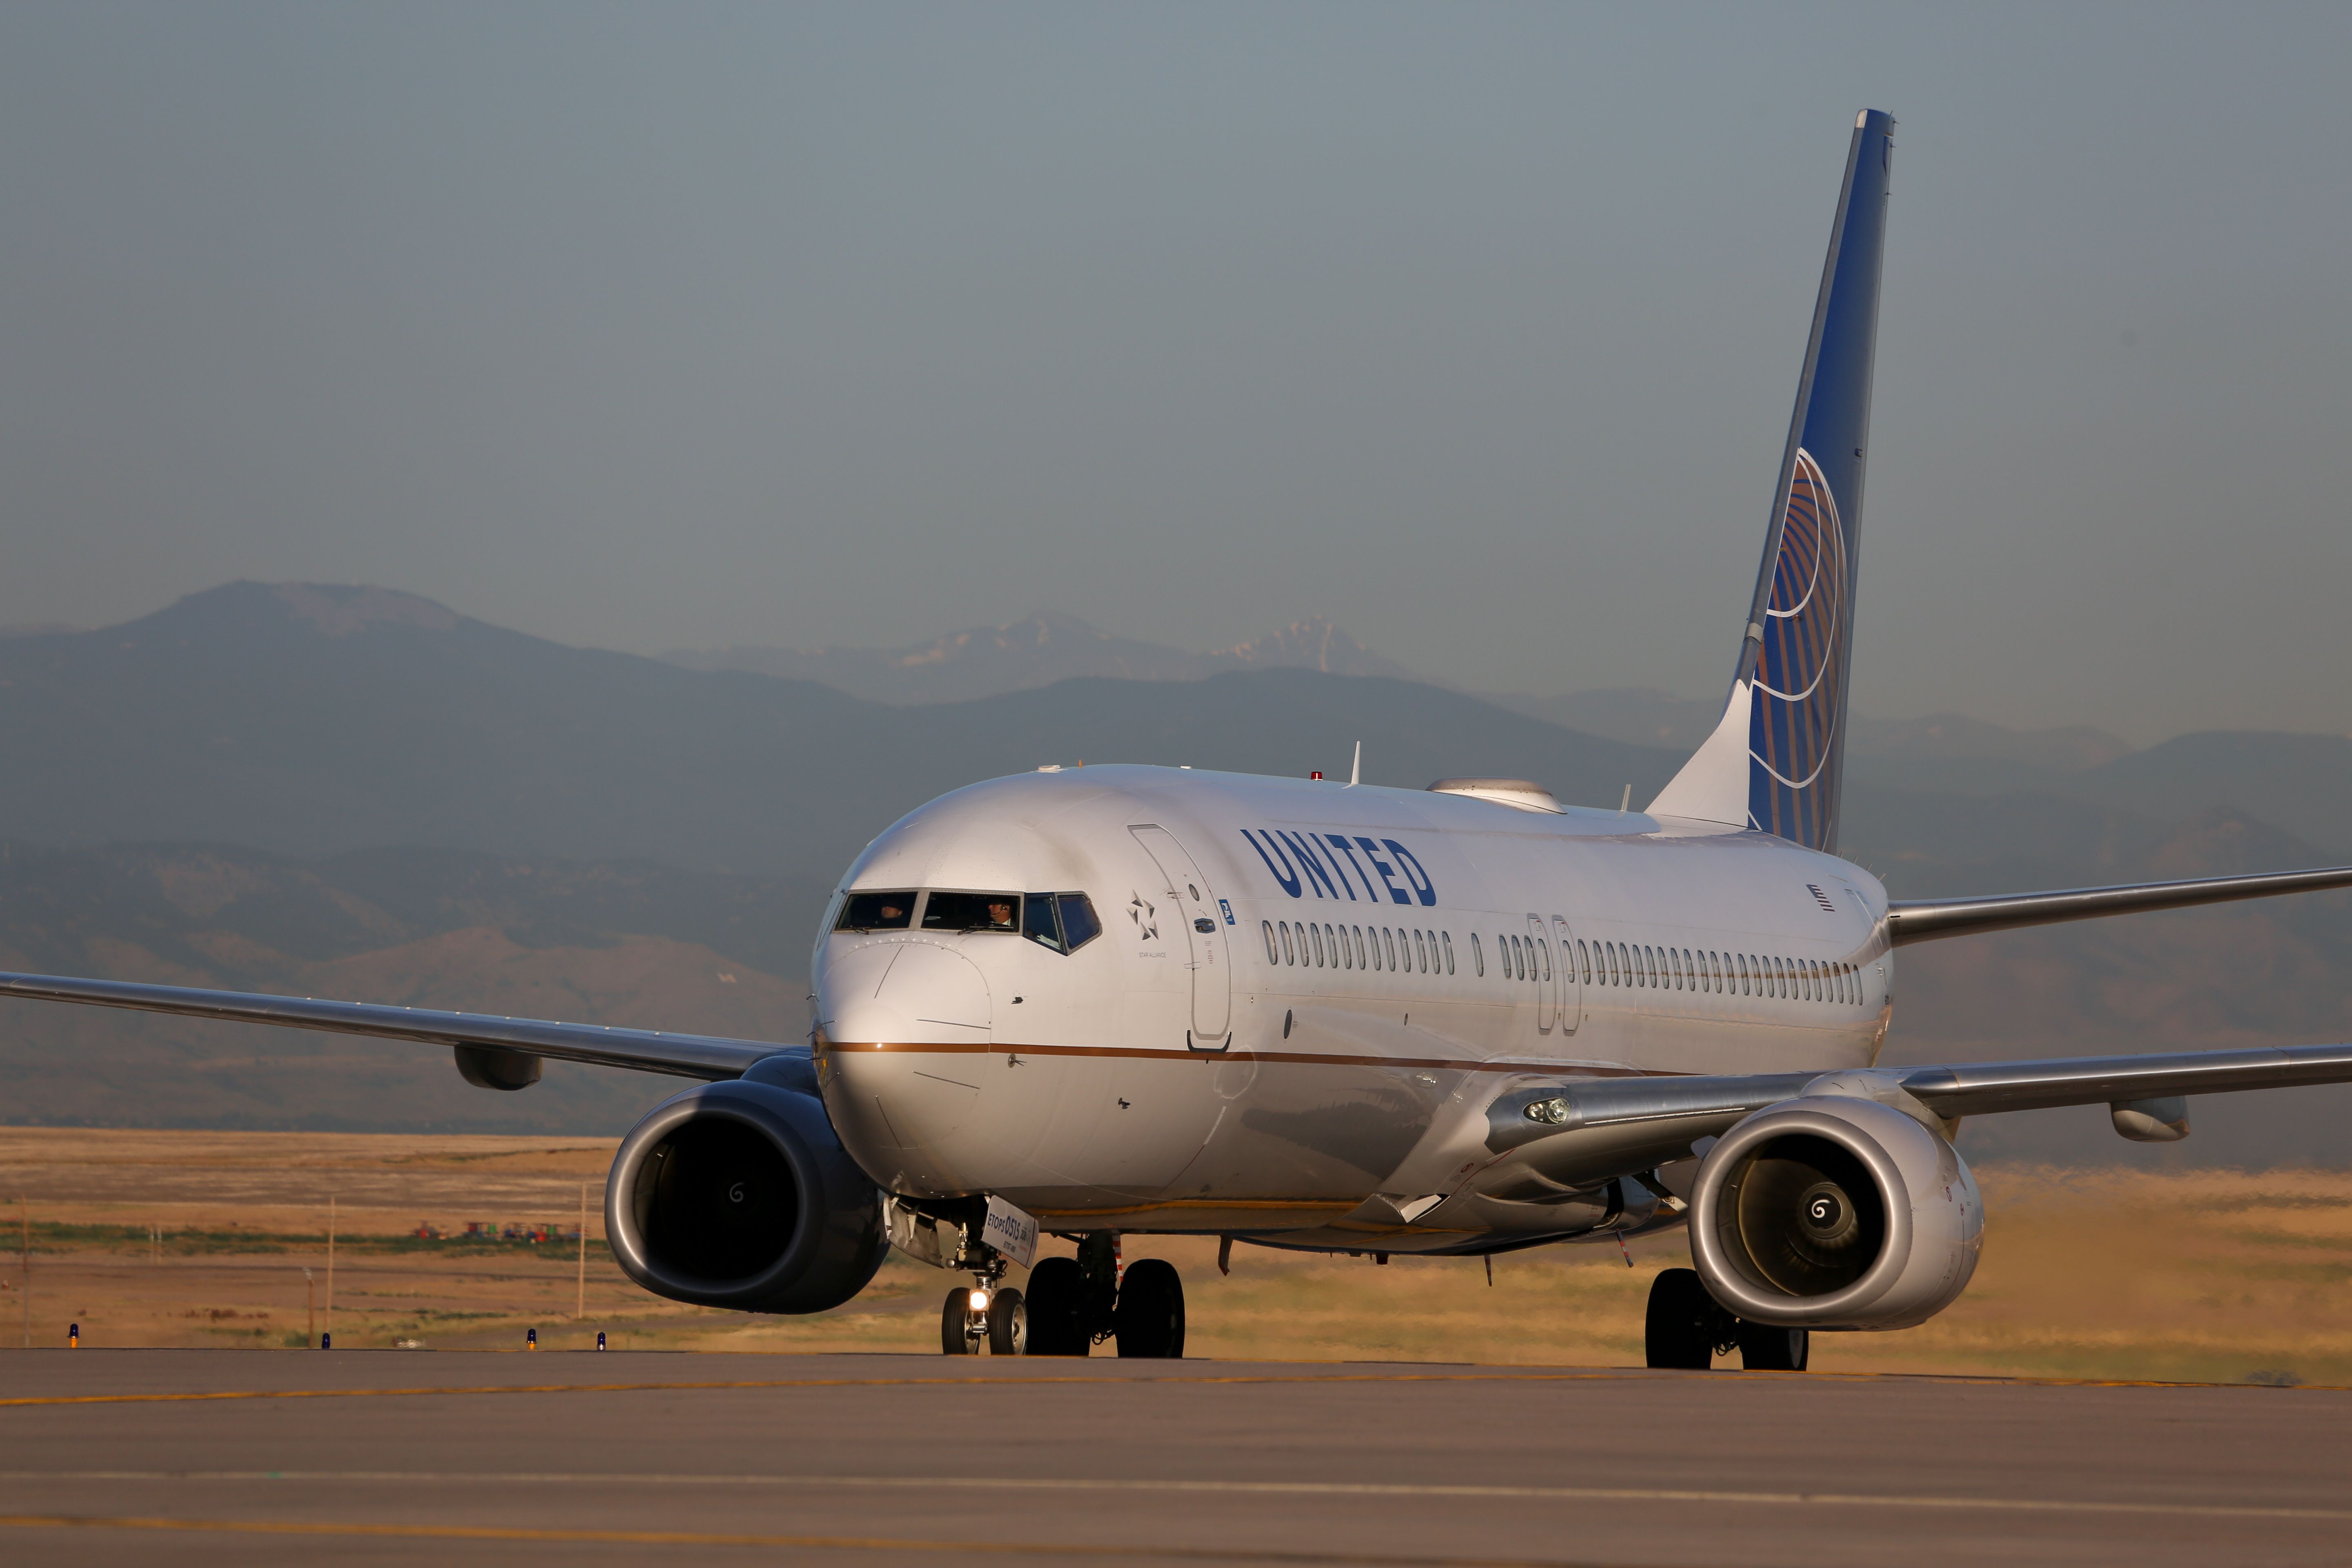 United Airlines Boeing 737 on taxiway